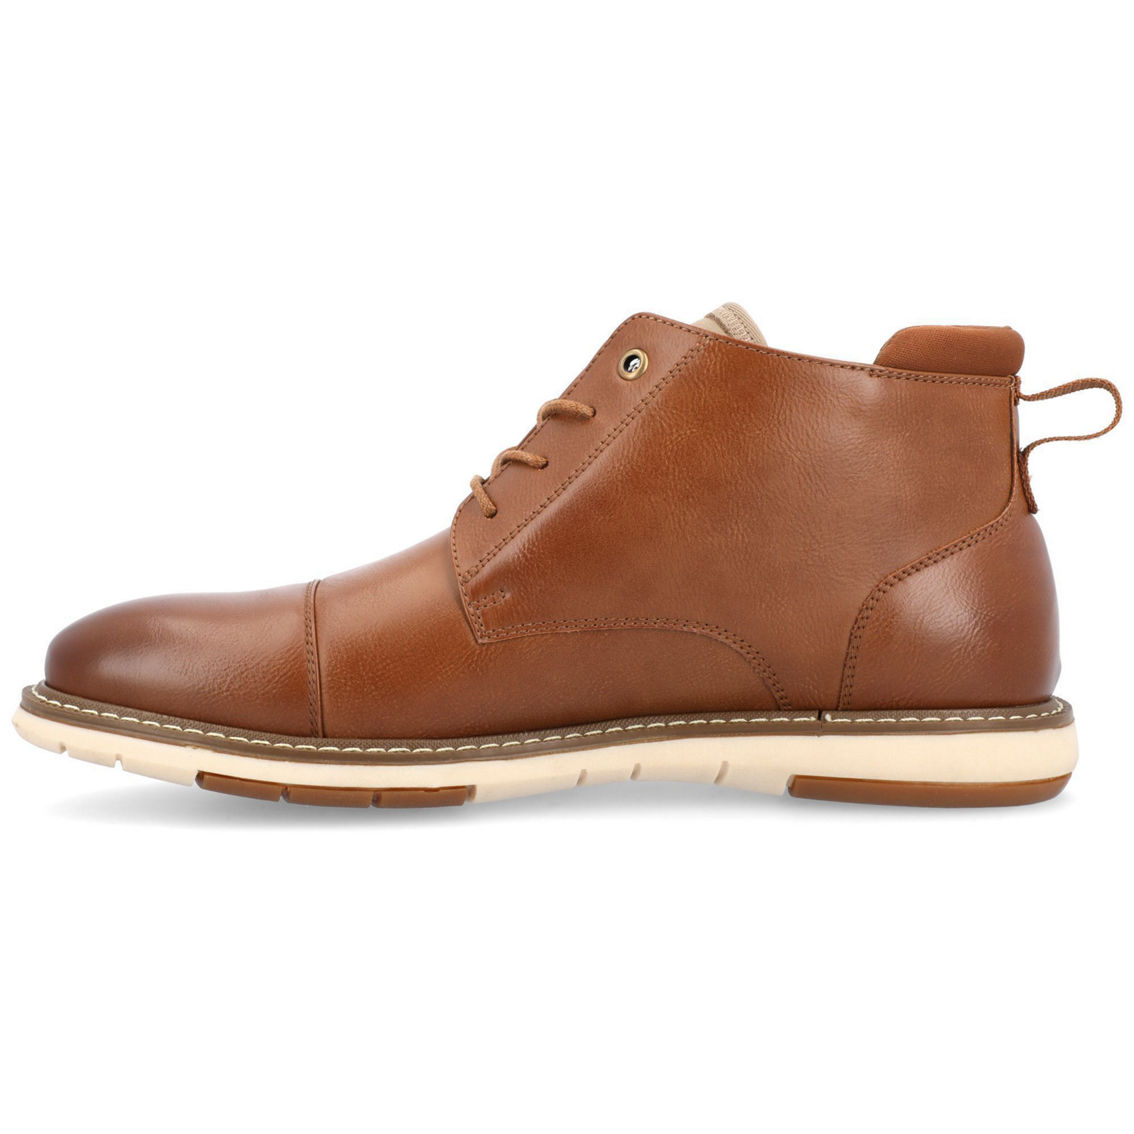 Vance Co. Redford Lace-up Hybrid Chukka Boot - Image 4 of 5